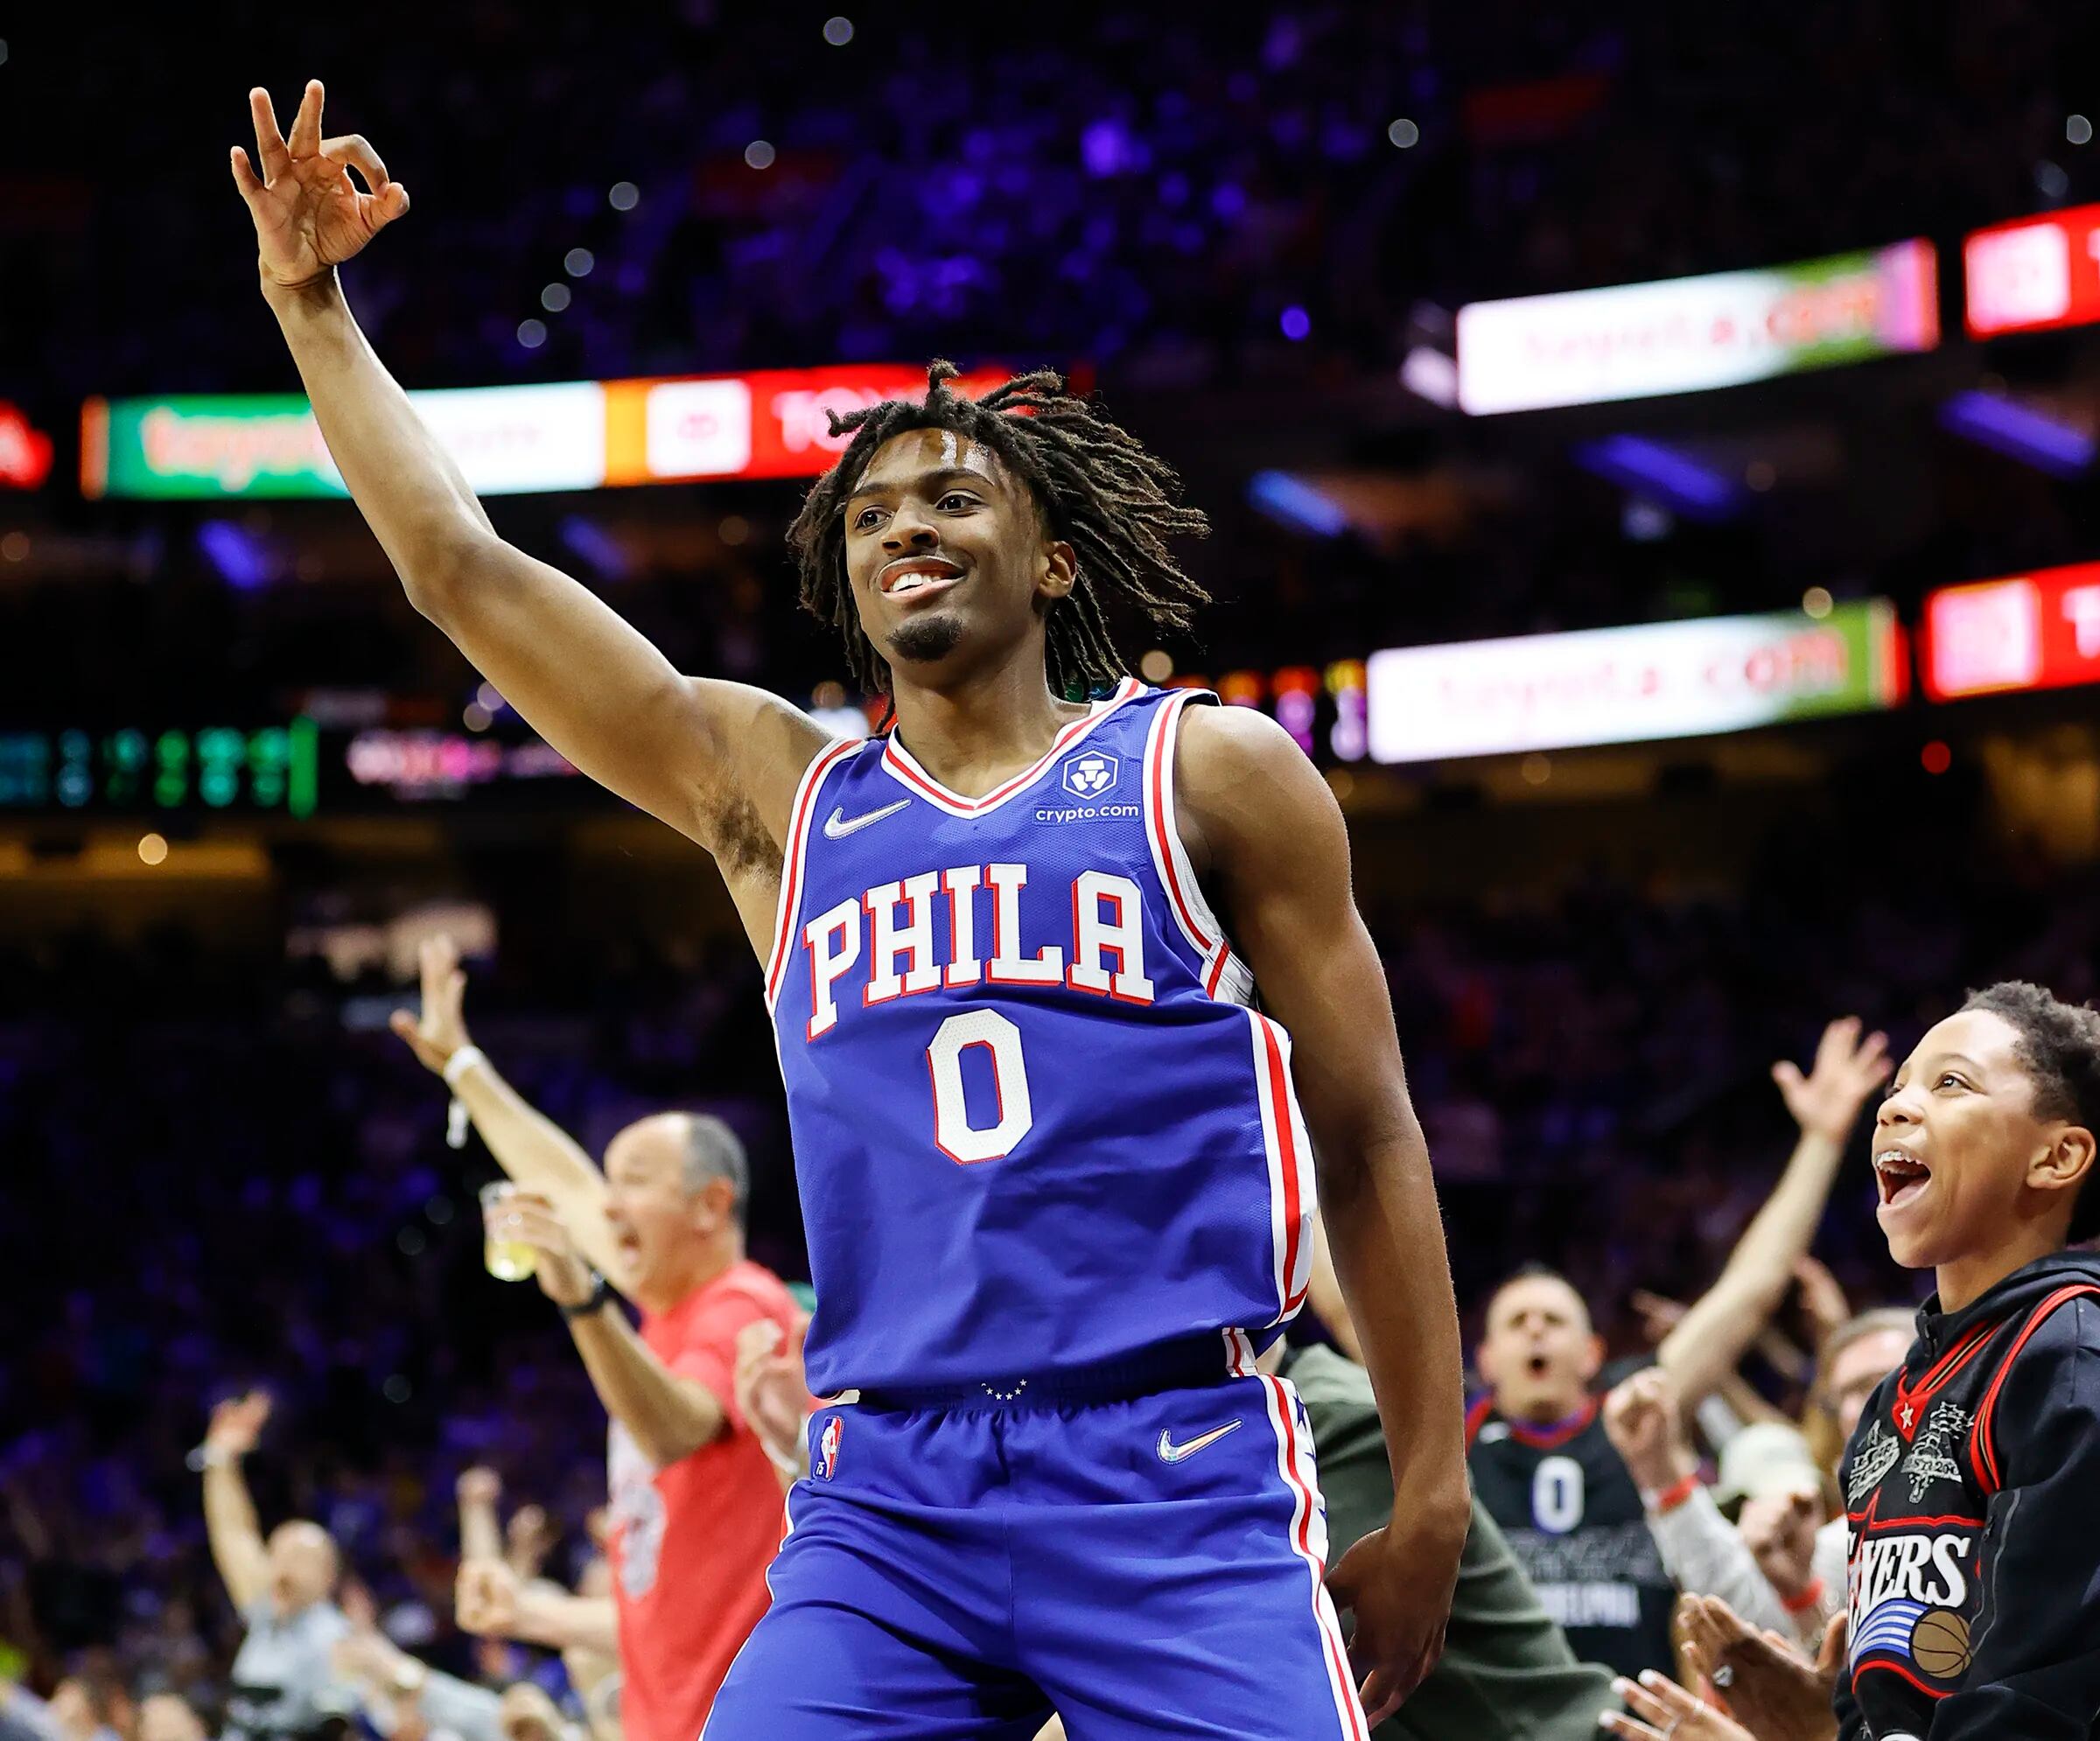 The Sixers Have Their Superstars. But Tyrese Maxey Is Their X-Factor.